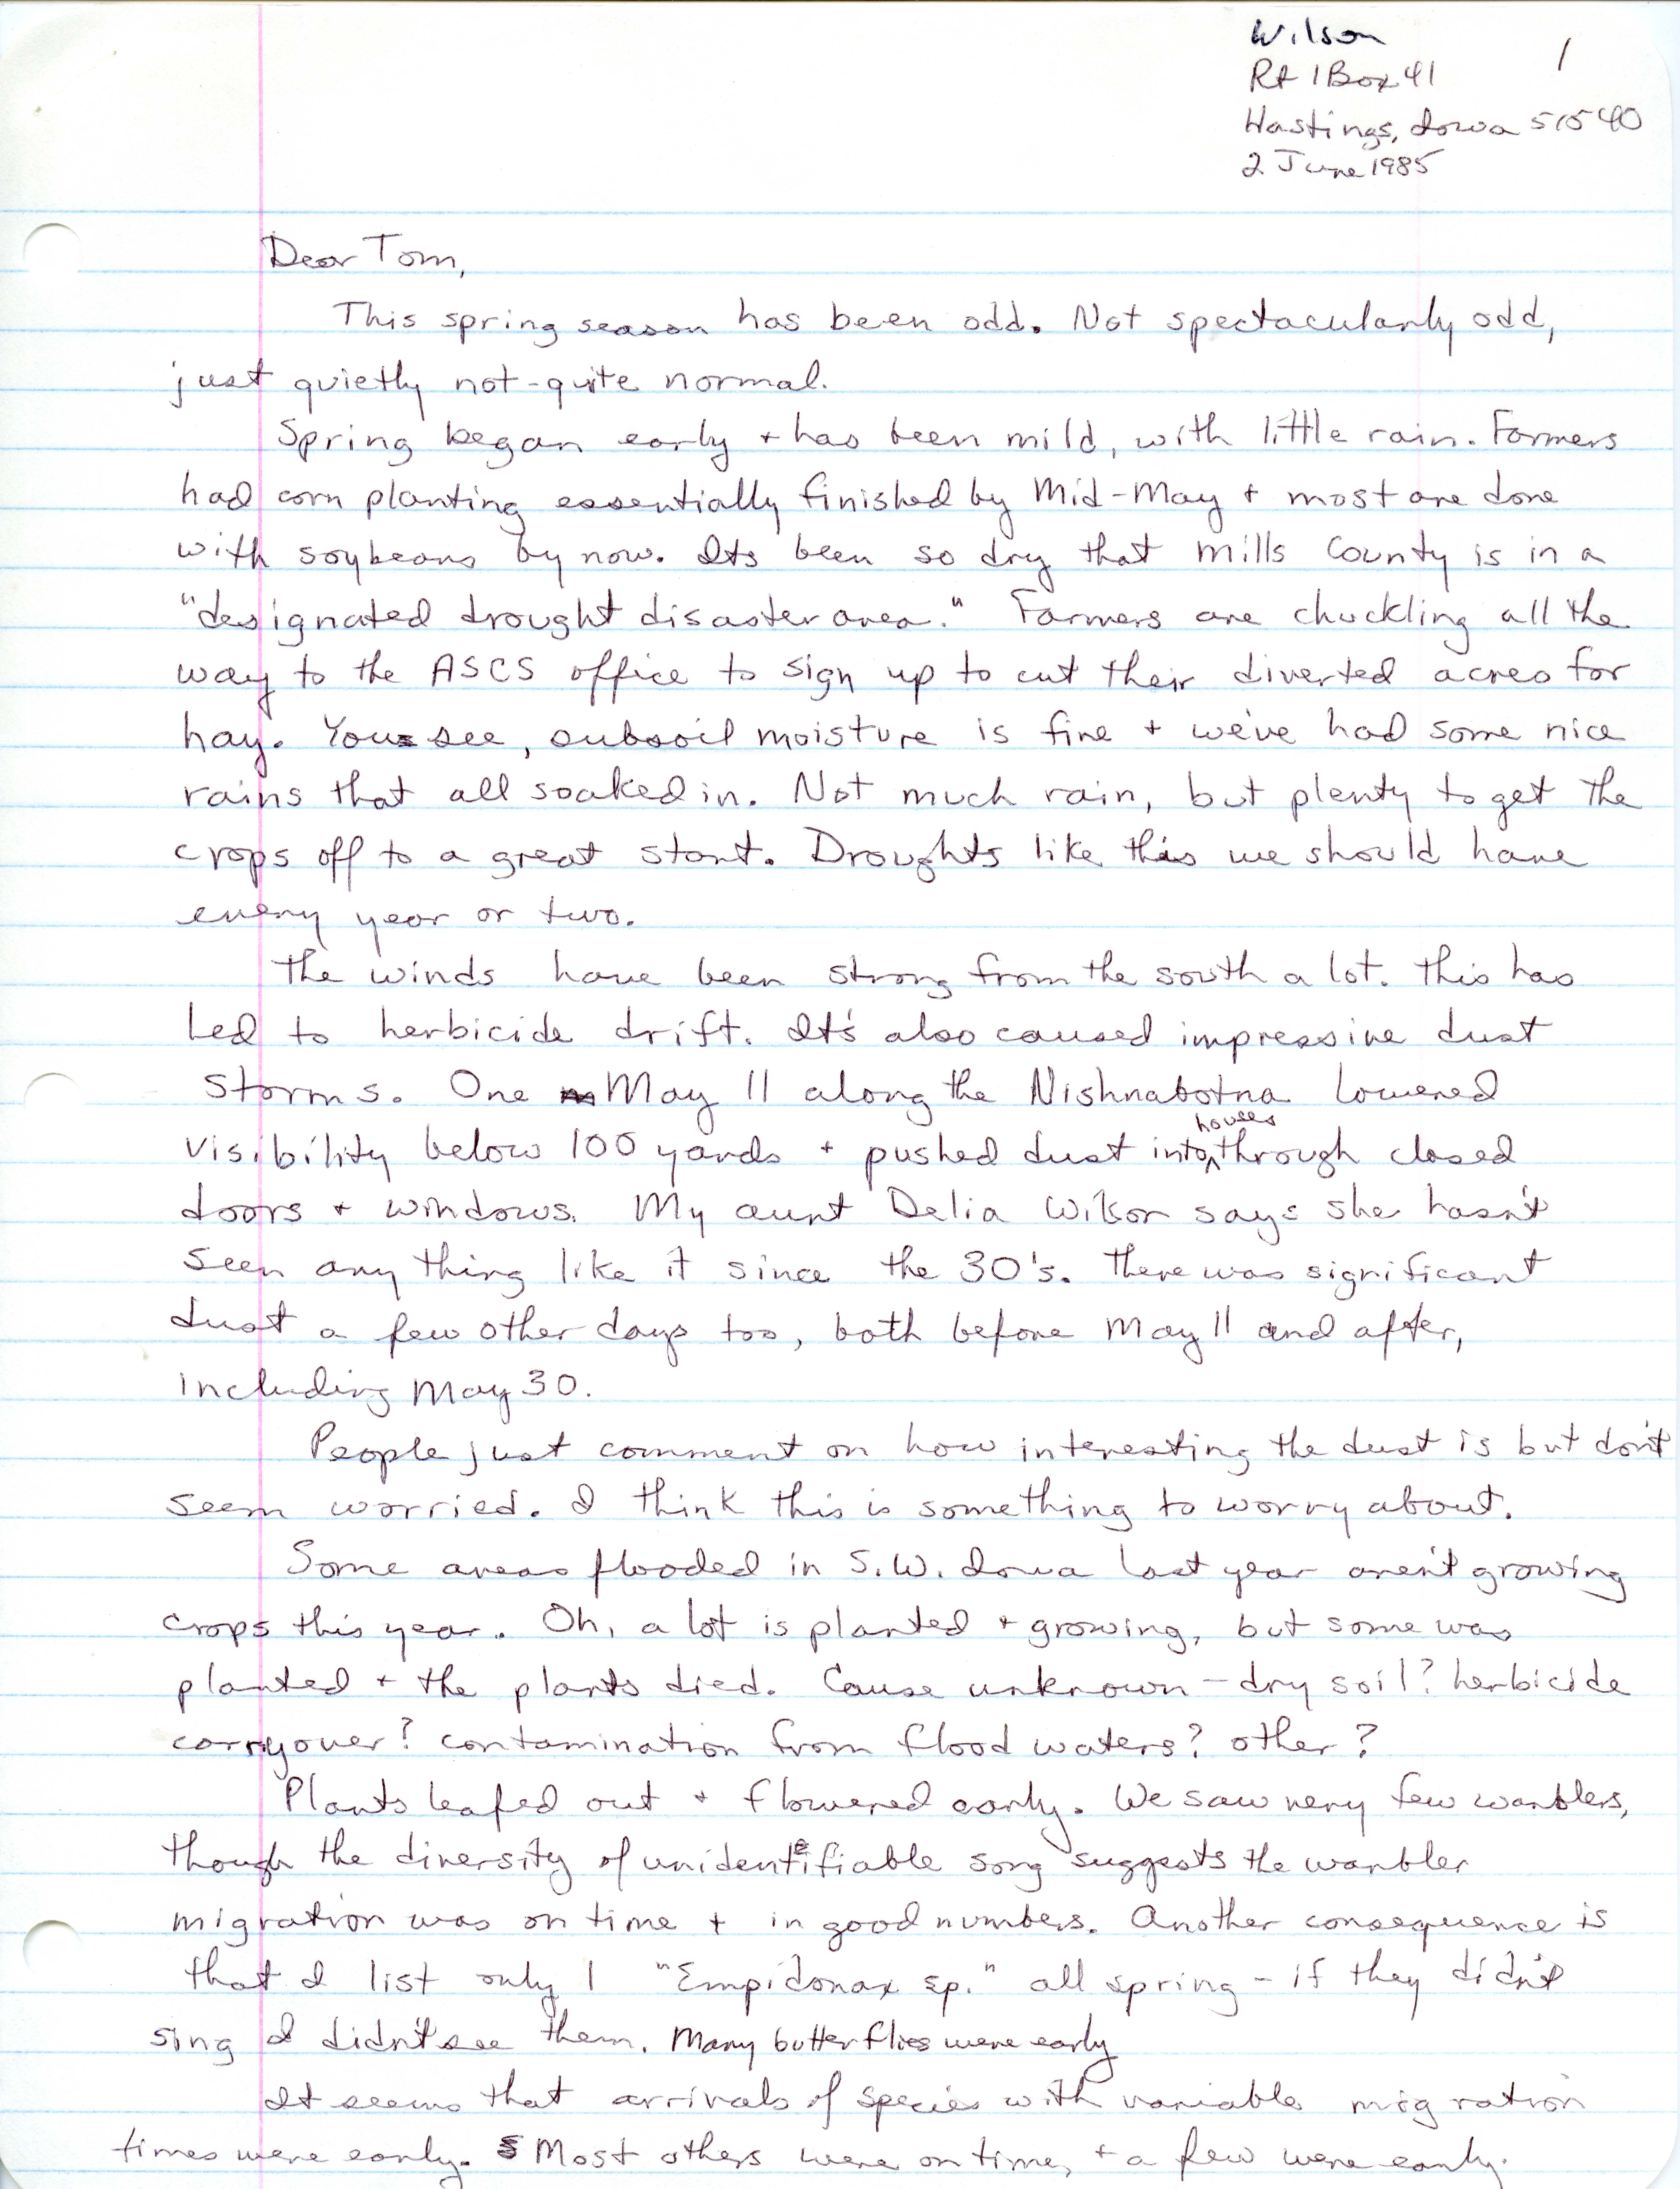 Barb L. Wilson letter to Thomas H. Kent regarding weather and bird migration, June 2, 1985, with accompanying field notes